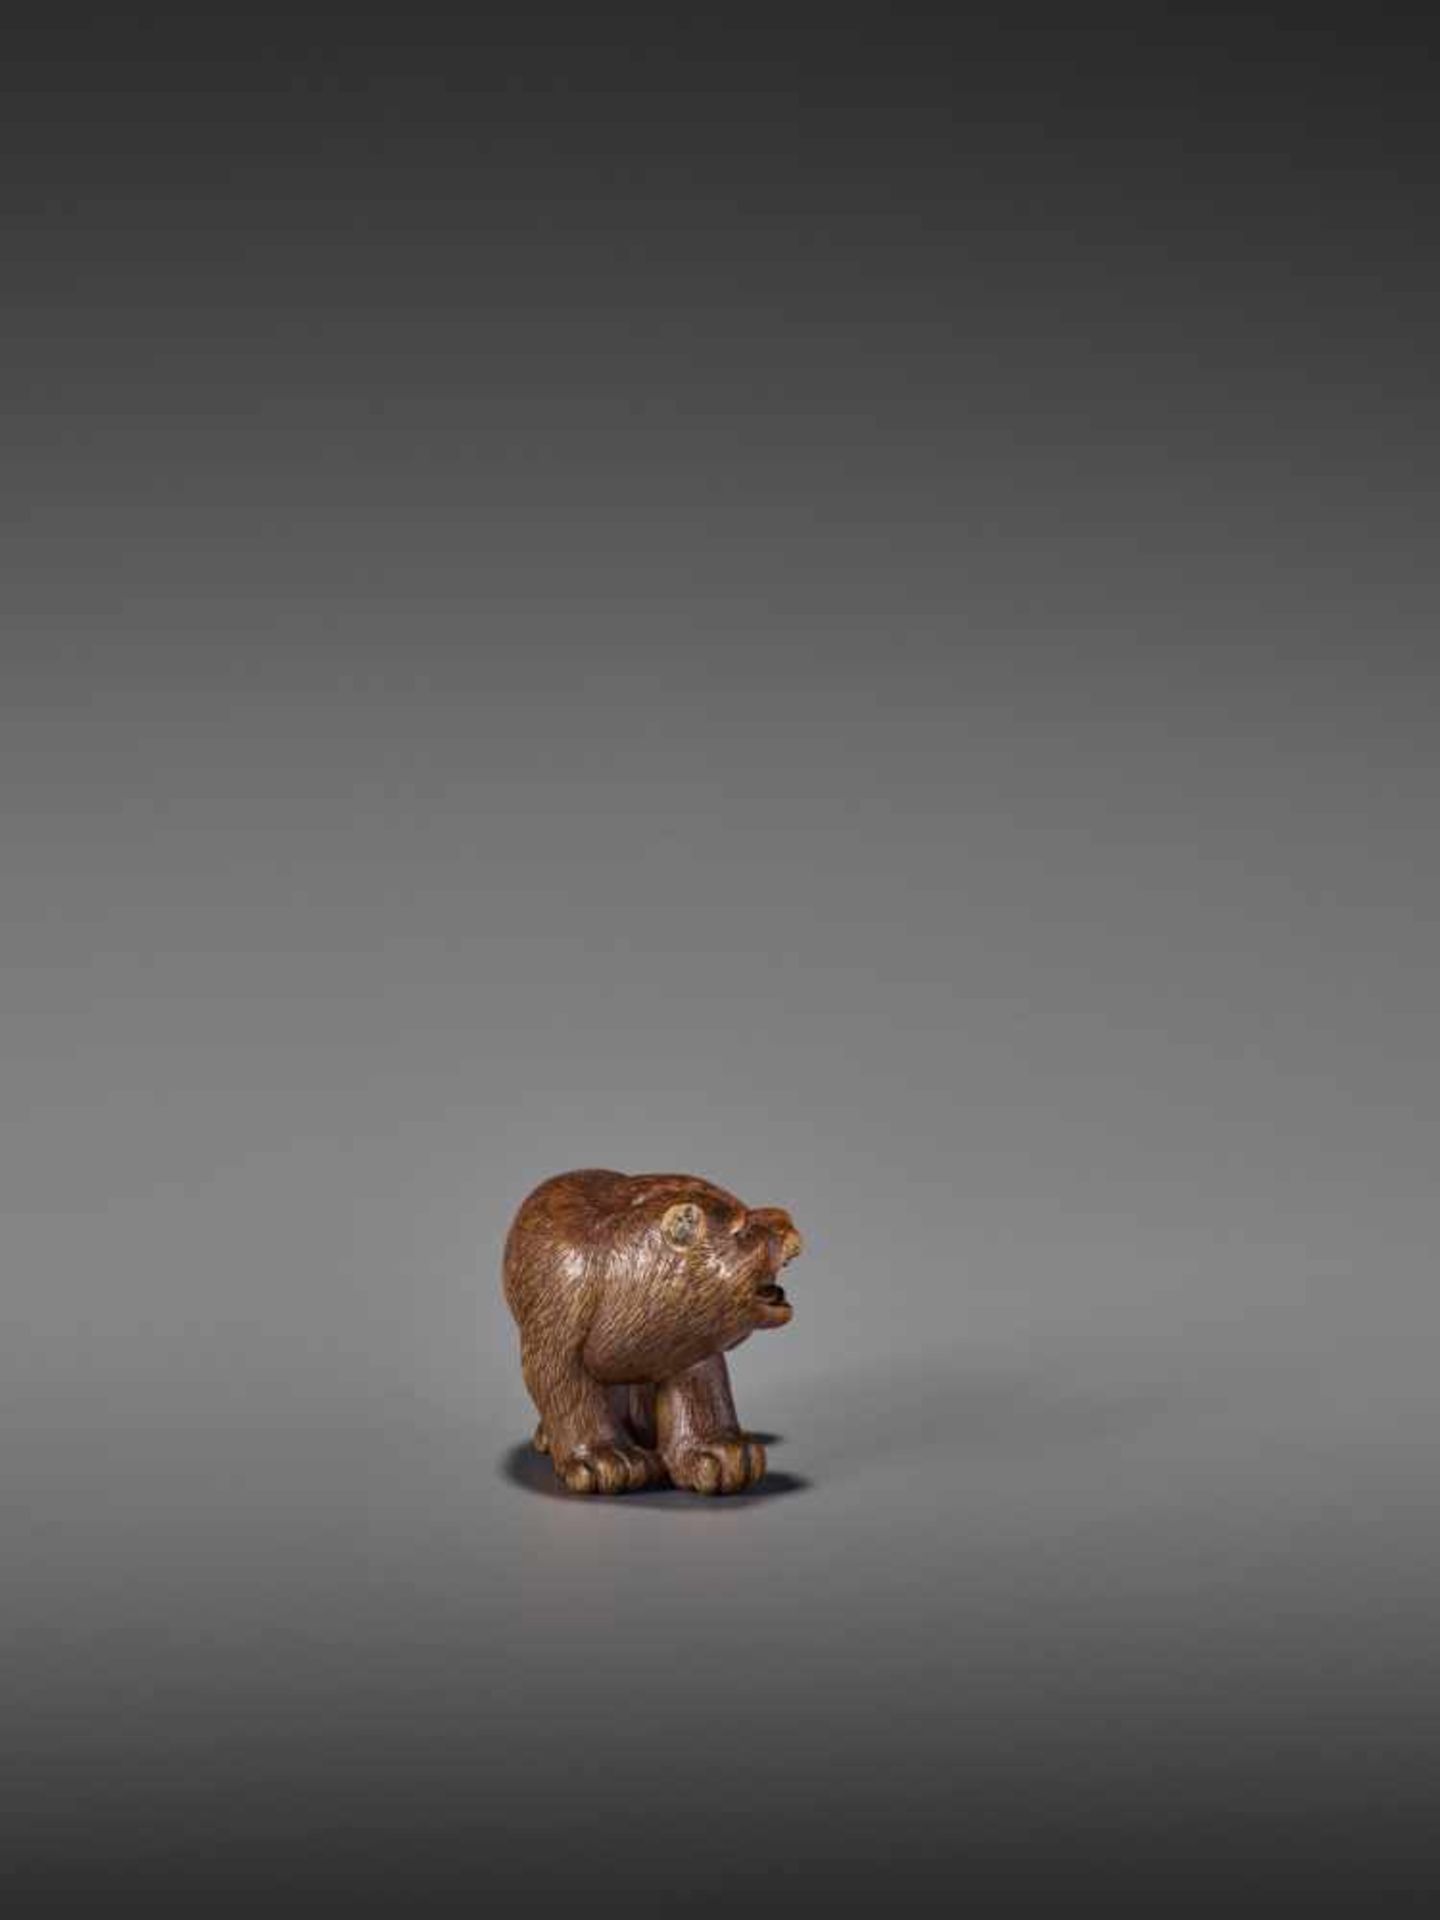 A RARE WOOD NETSUKE OF A SNARLING TIGER UnsignedJapan, 19th century, Edo period (1615-1868)A compact - Image 6 of 11